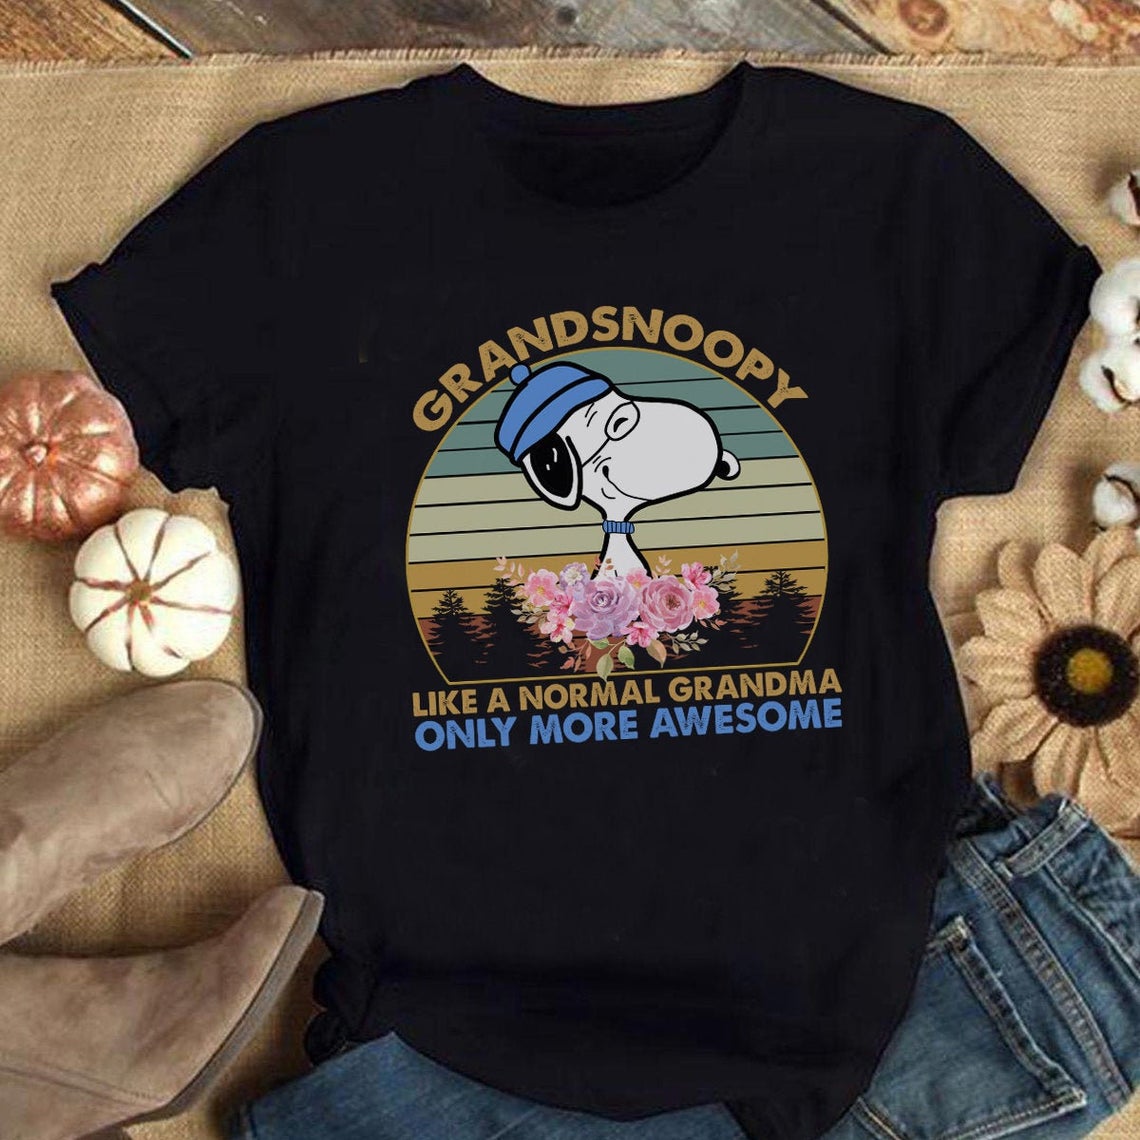 Snoopy Grandsnoopy Like A Normal Grandma Only More Awesome Vintage